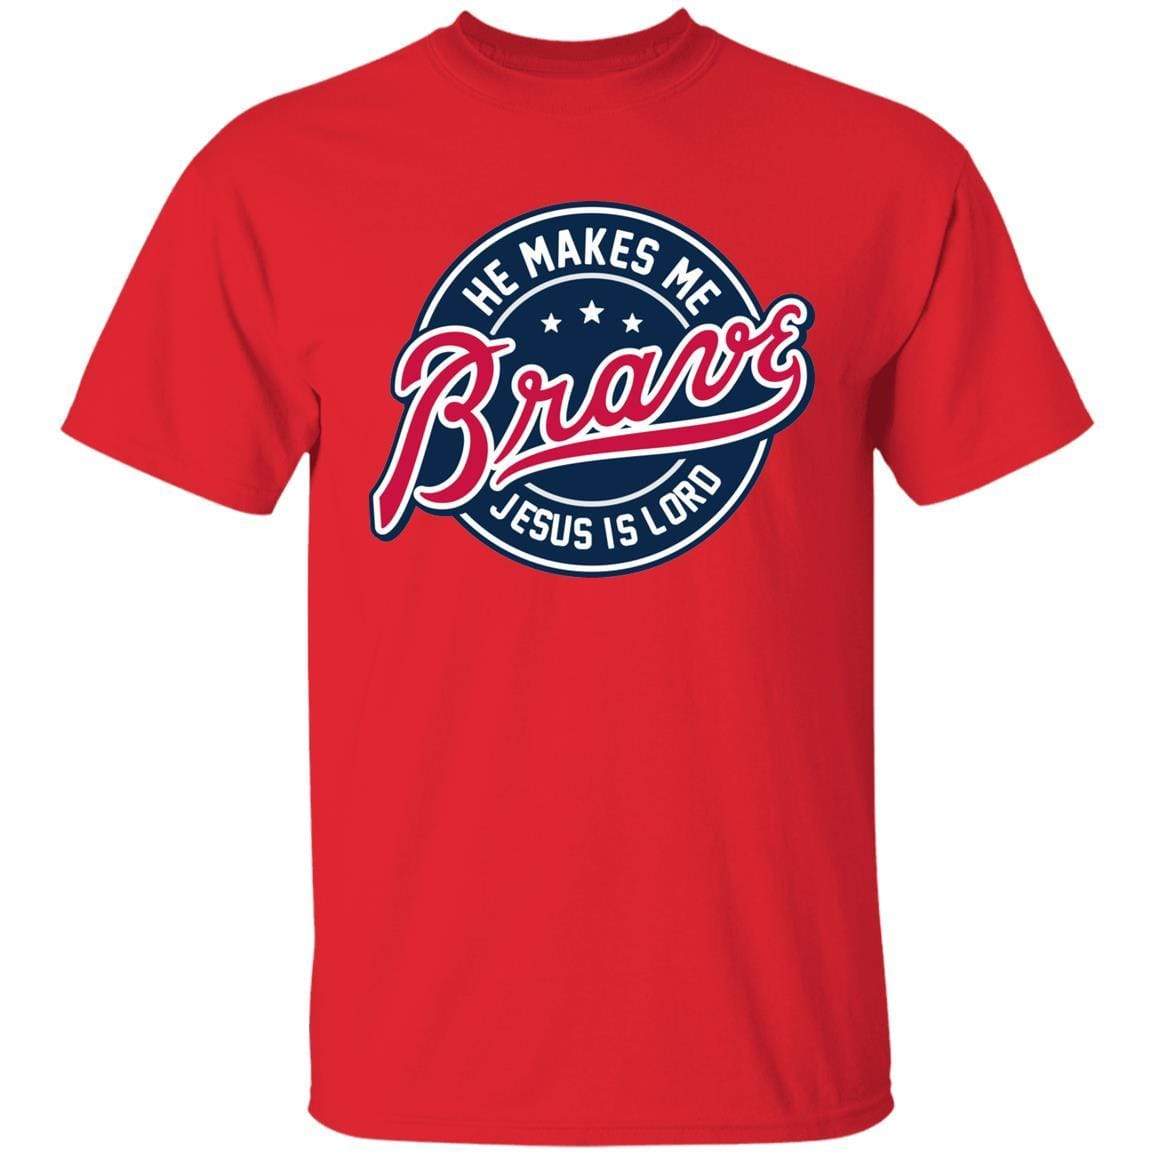 He Makes Me Brave * Sizes to 6xl * Shipping Inc. * GA sales add sales tax